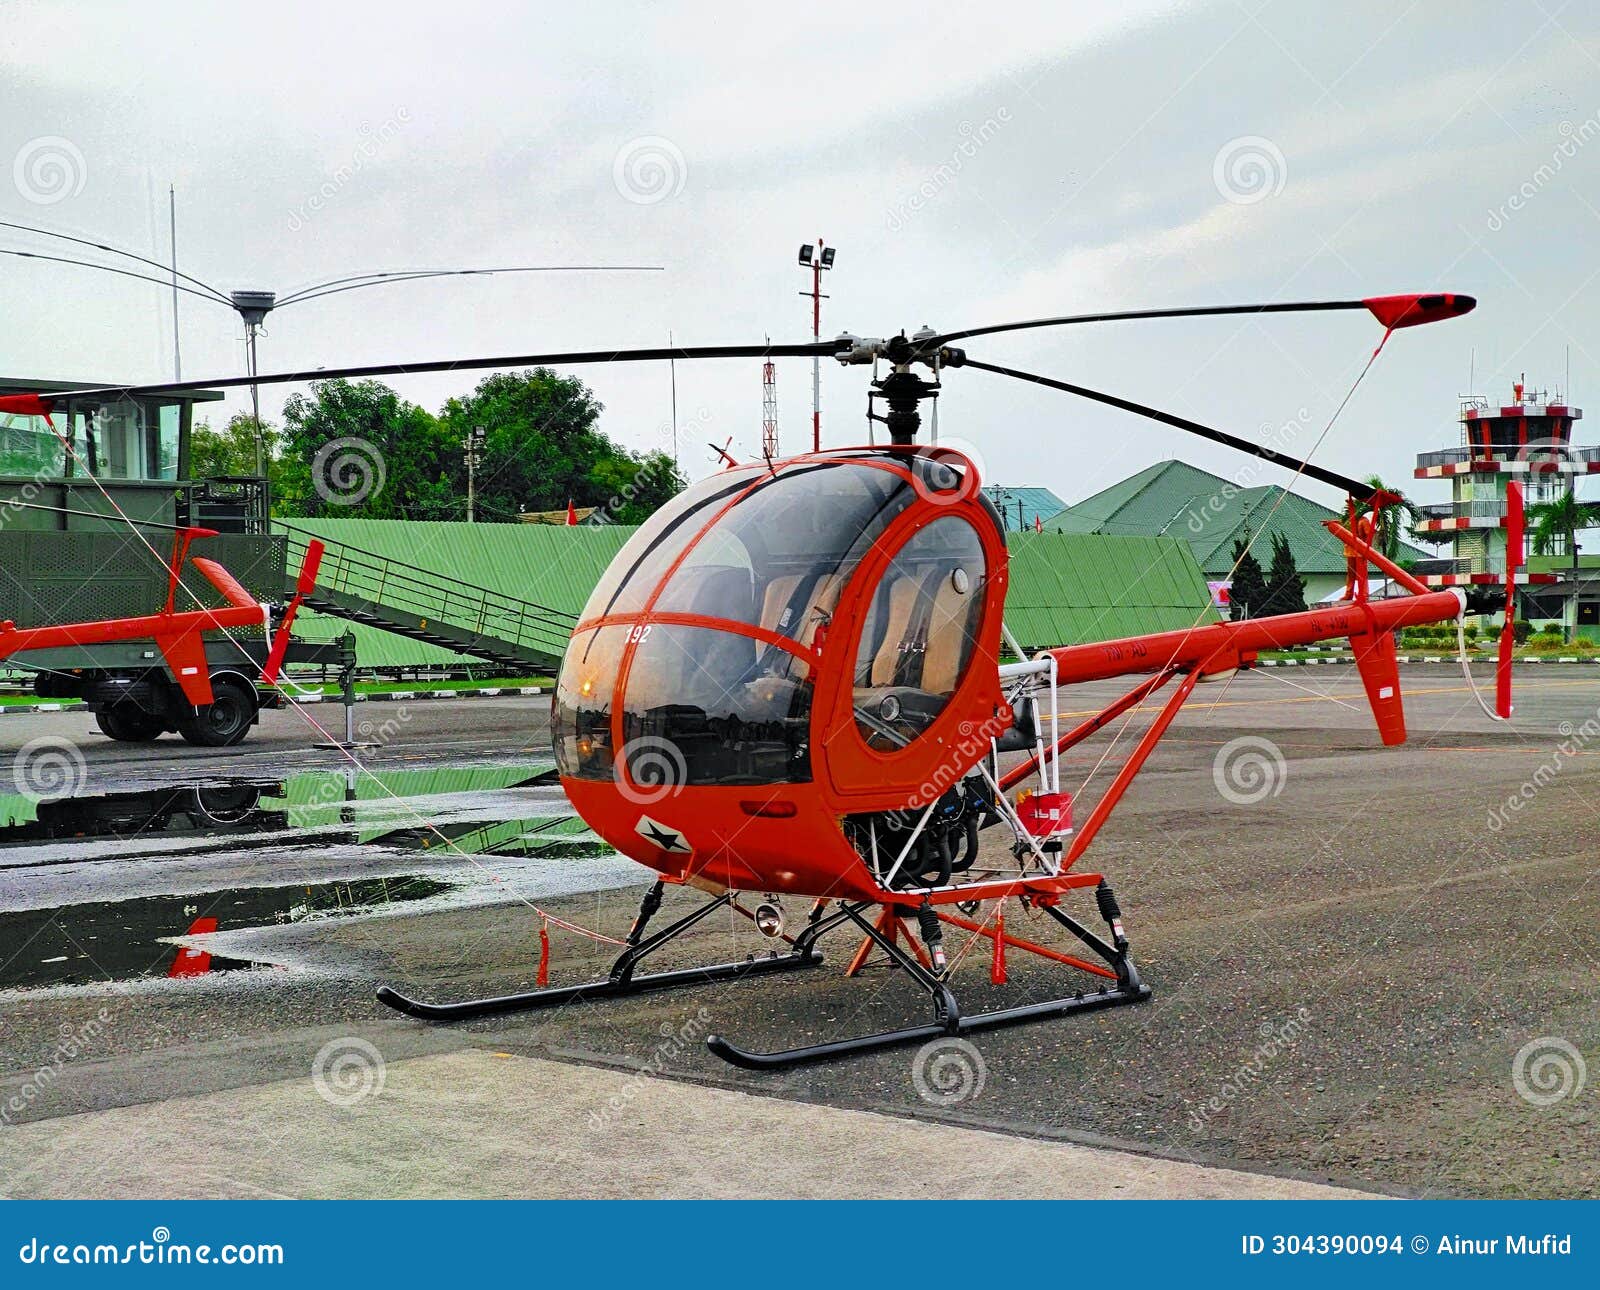 indonesian state combat helicopters help the army to fight to protect the sovereignty